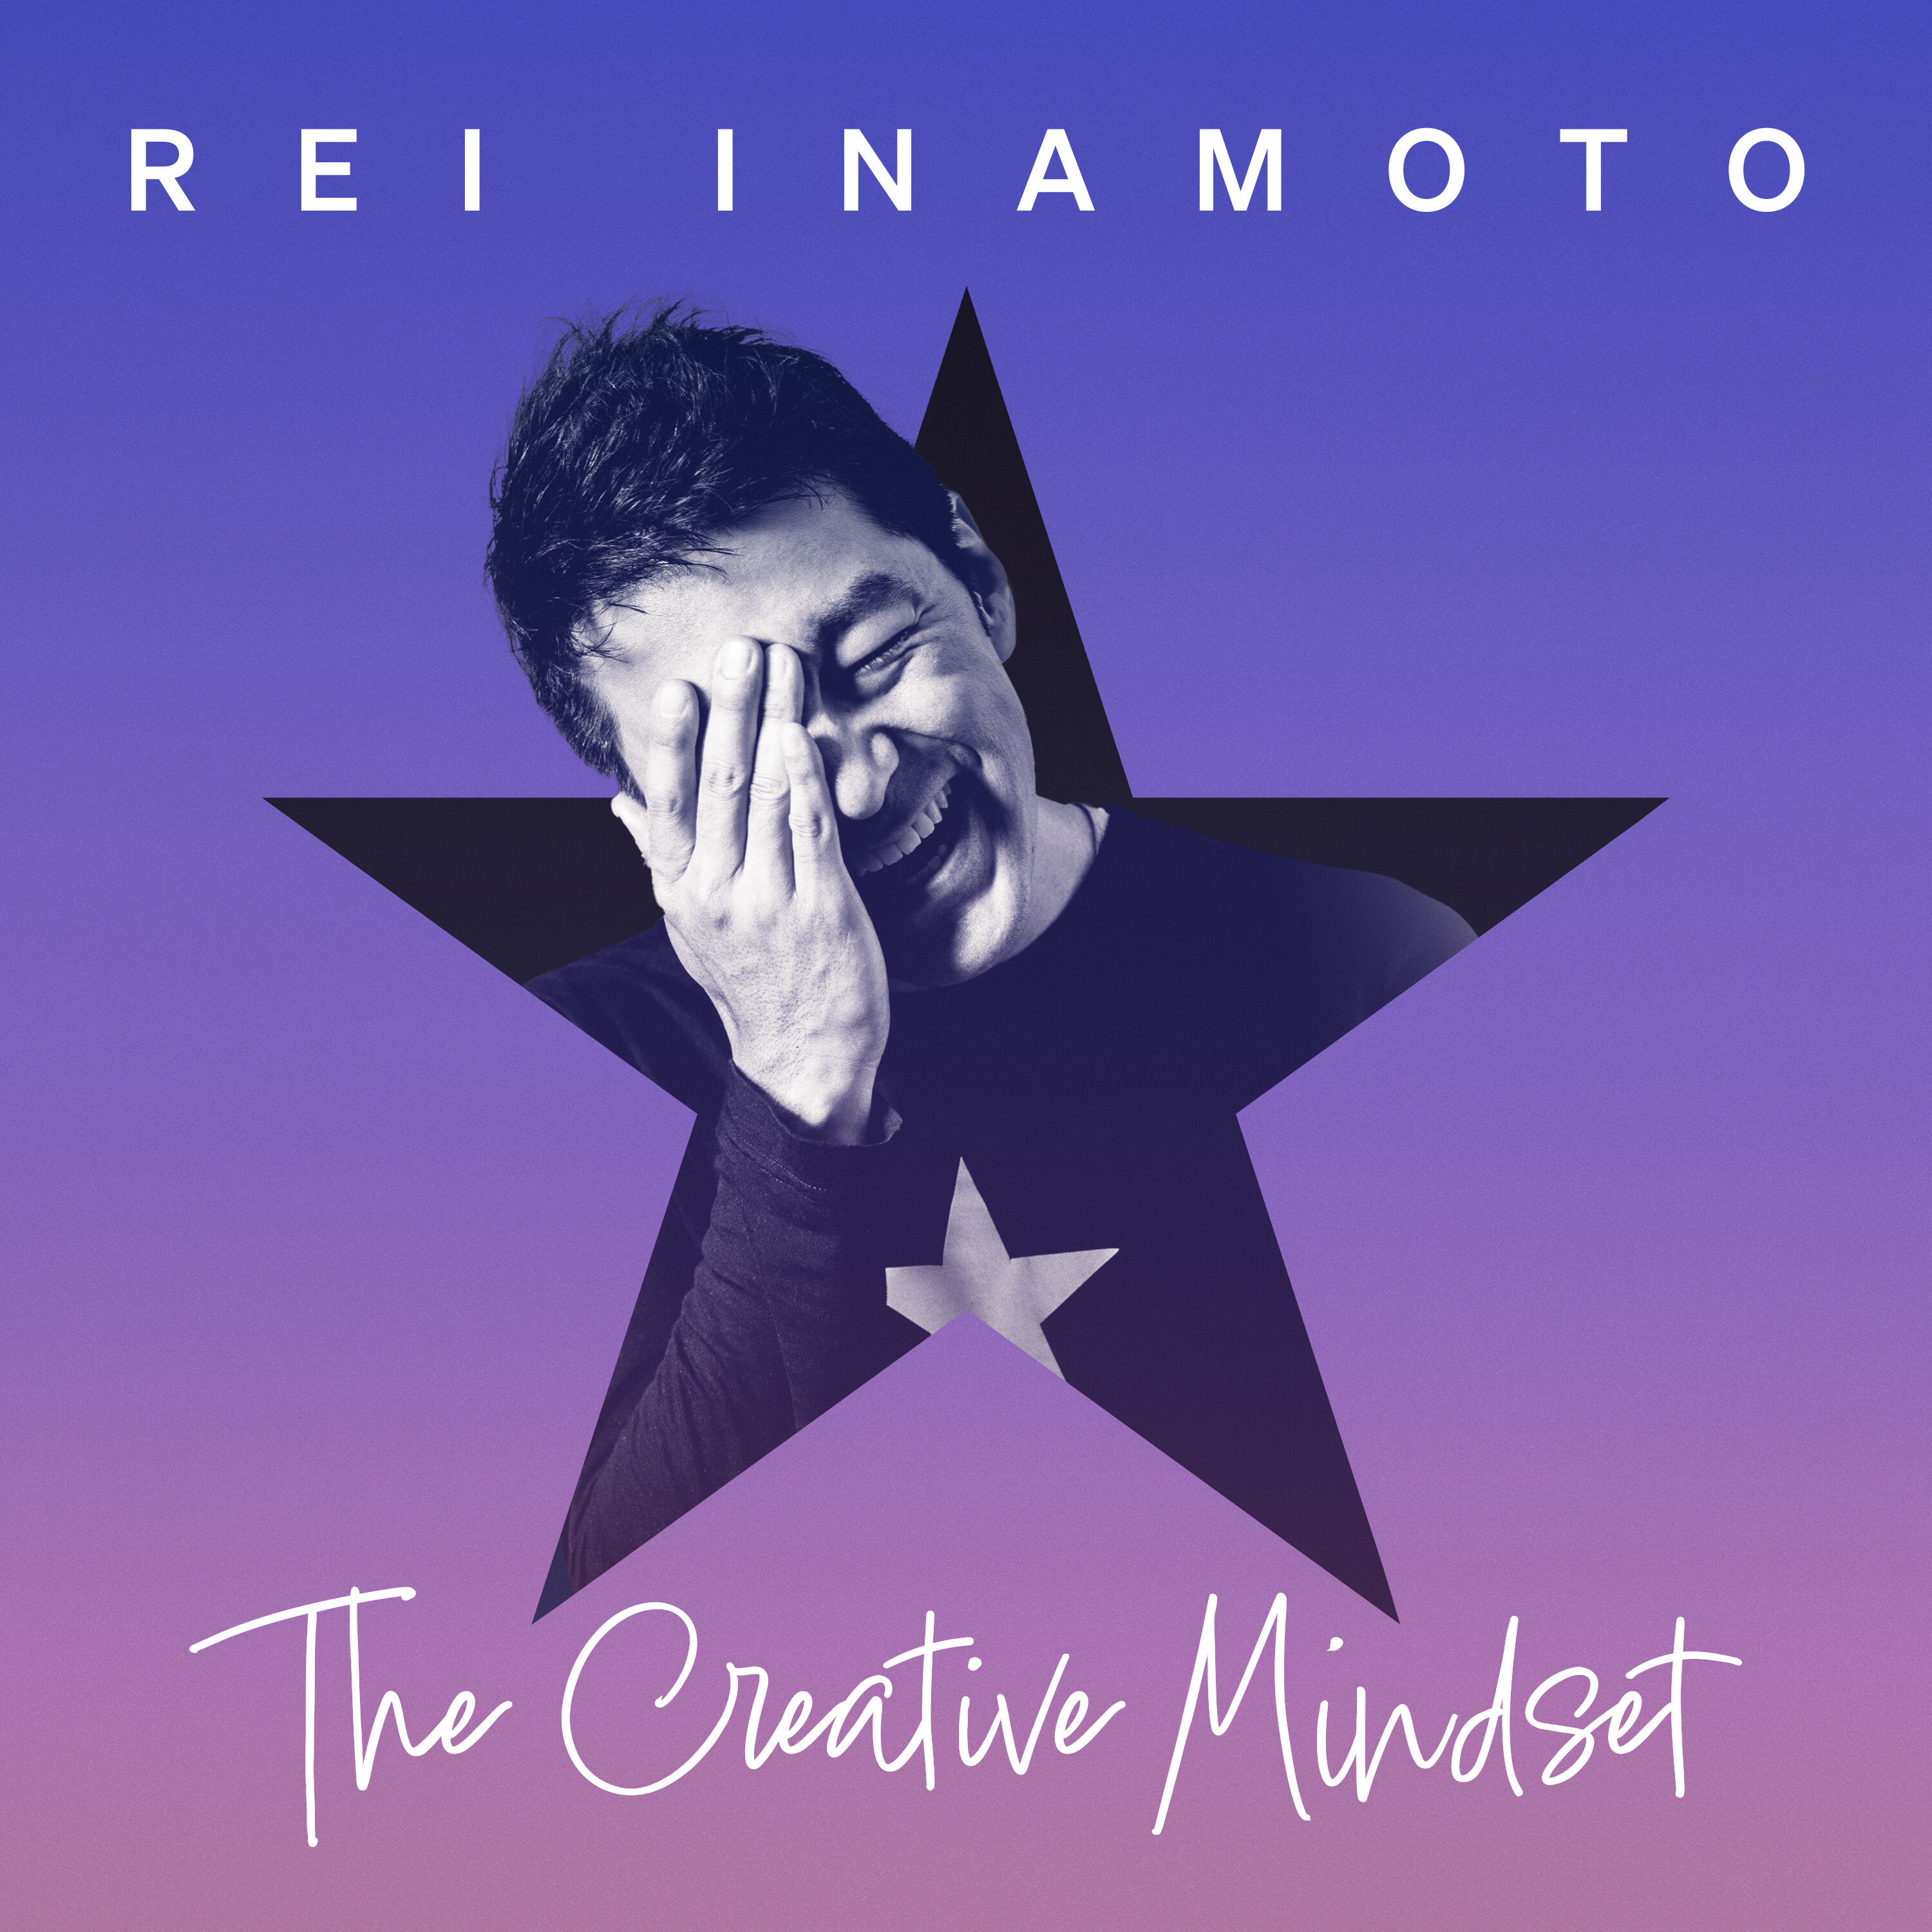 Introducing The Creative Mindset with Rei Inamoto